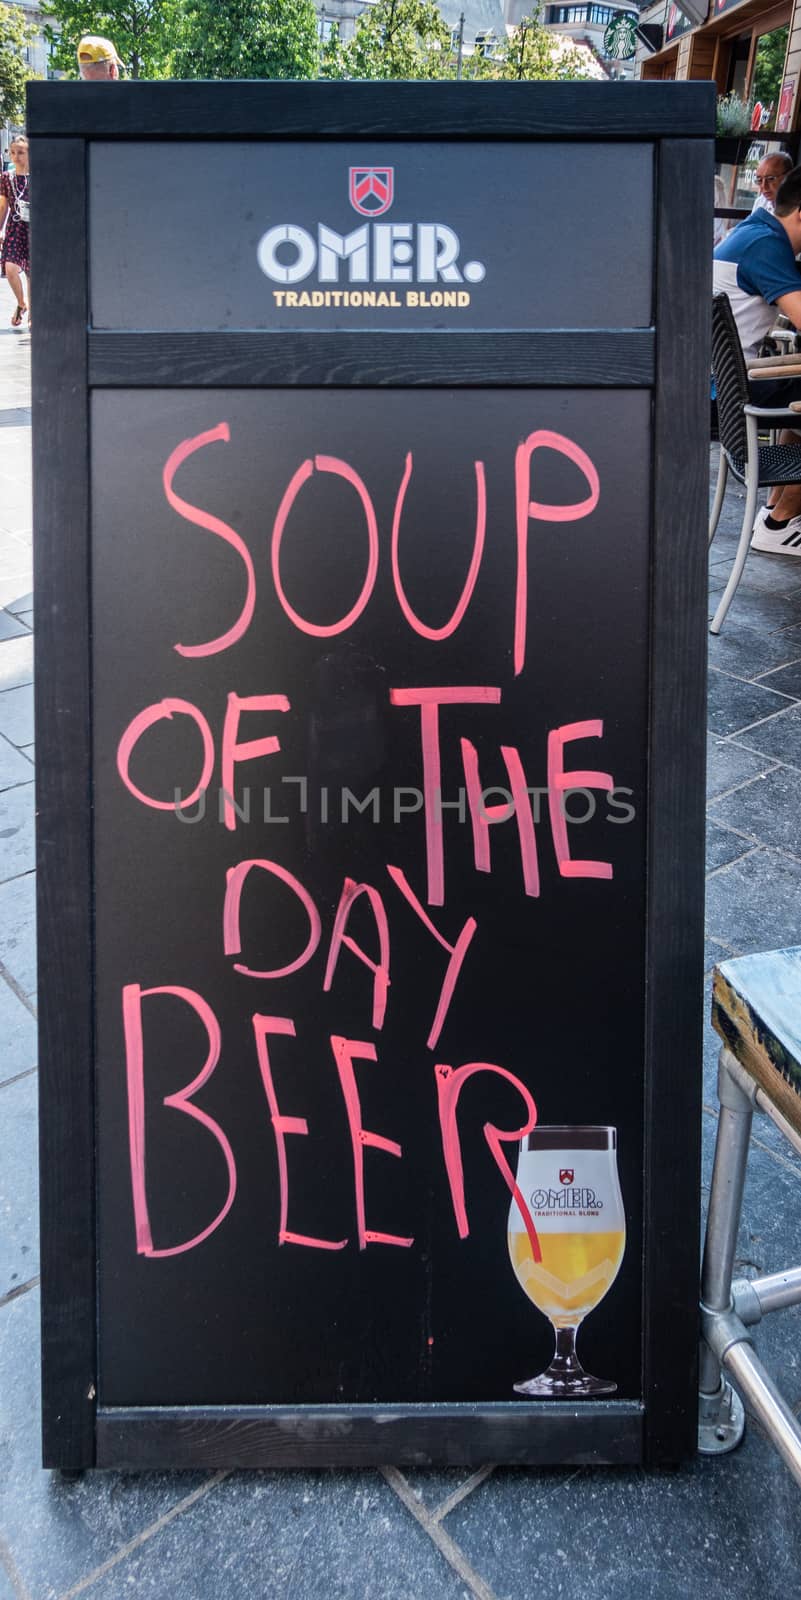 Antwerpen, Belgium - June 23, 2019: Pink on blackboard sign reading Soup of the Day, Beer, with advertisement for Omer ale.